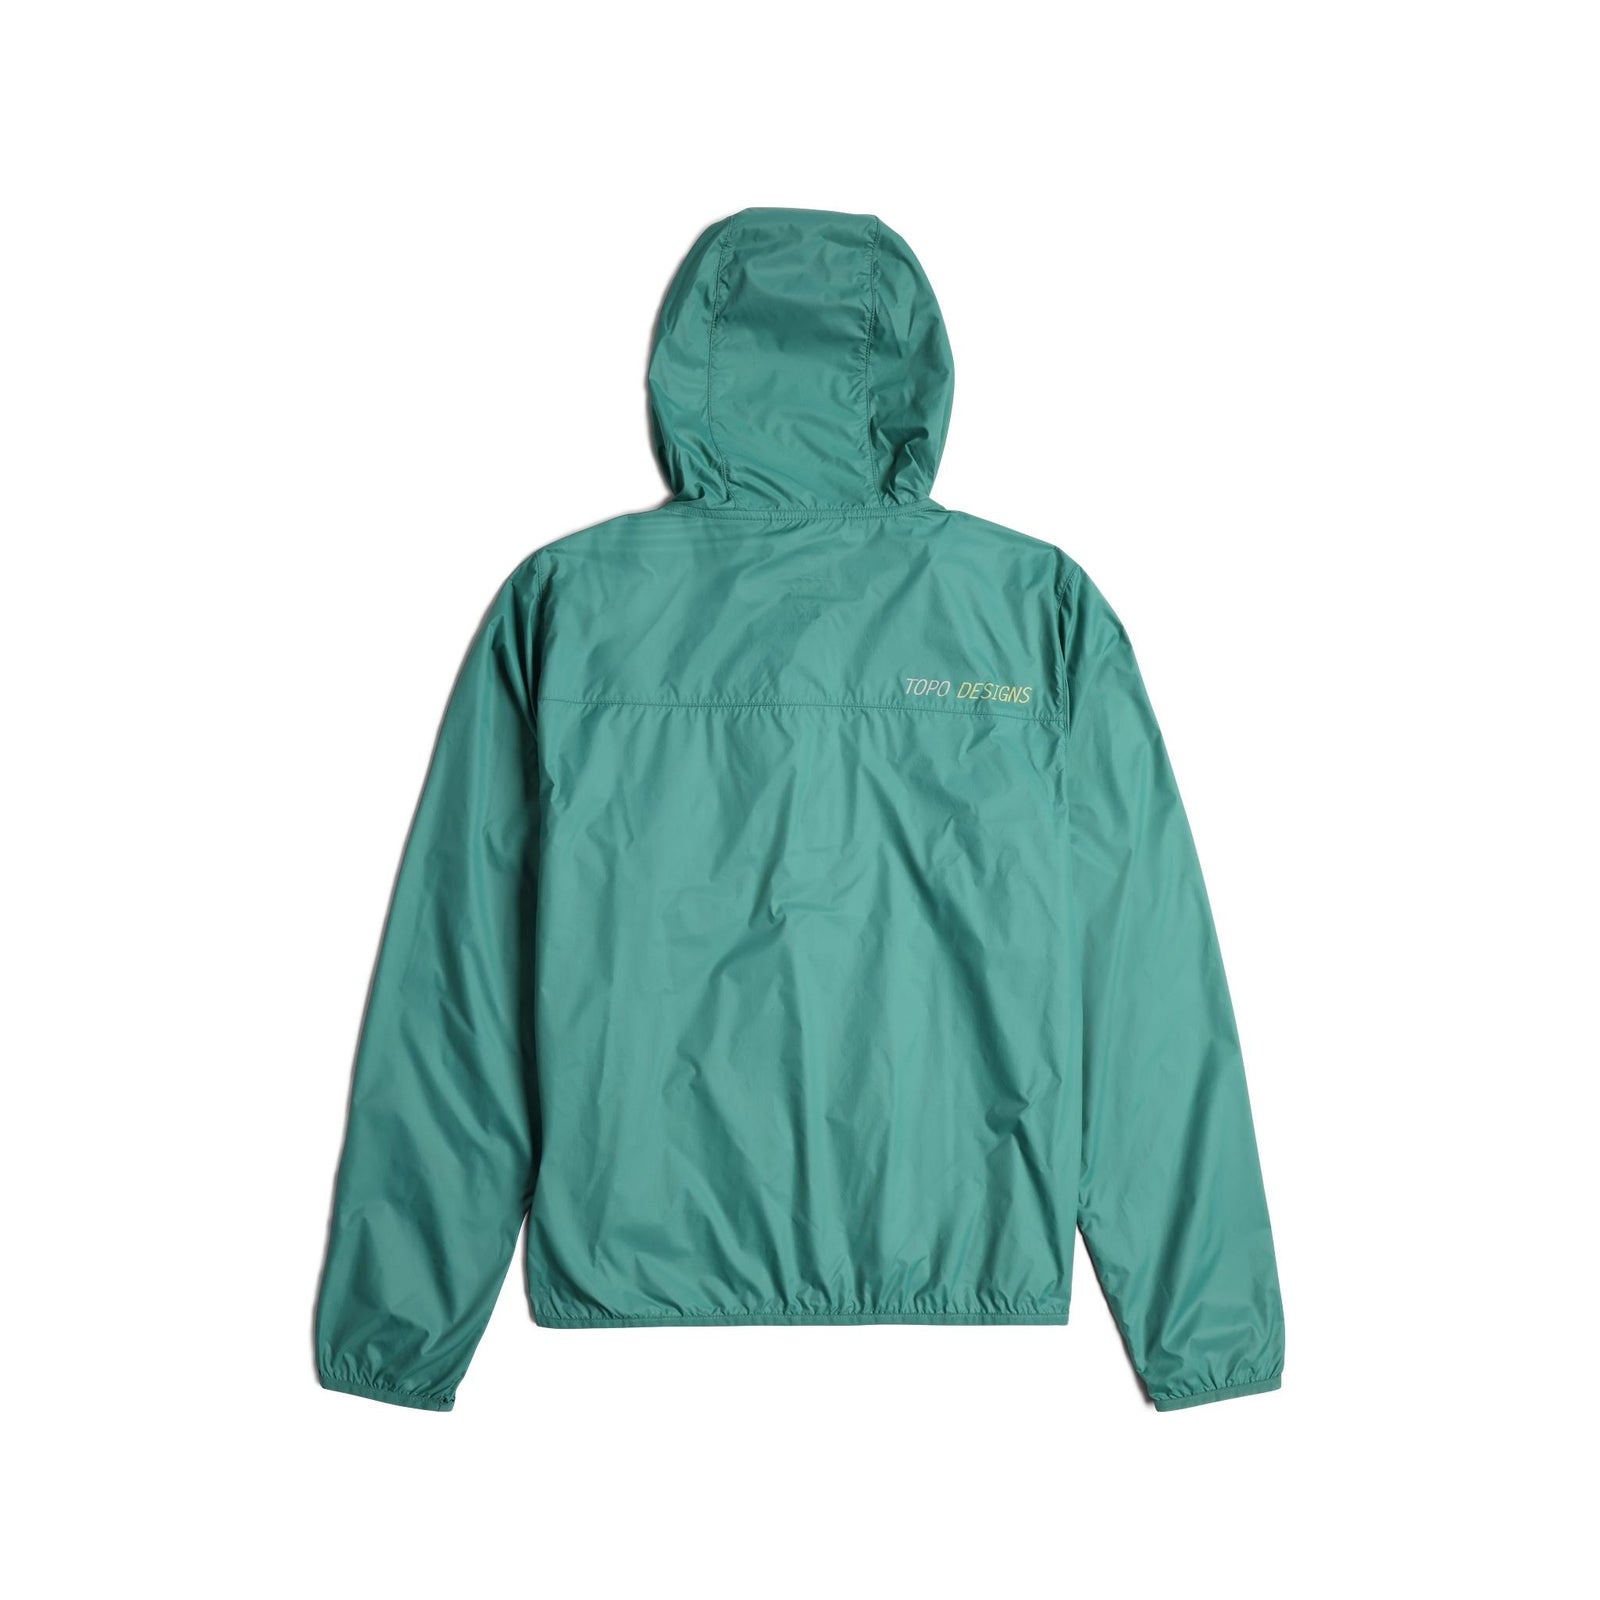 Back View of Topo Designs Global Ultralight Packable Jacket - Women's in "Caribbean"